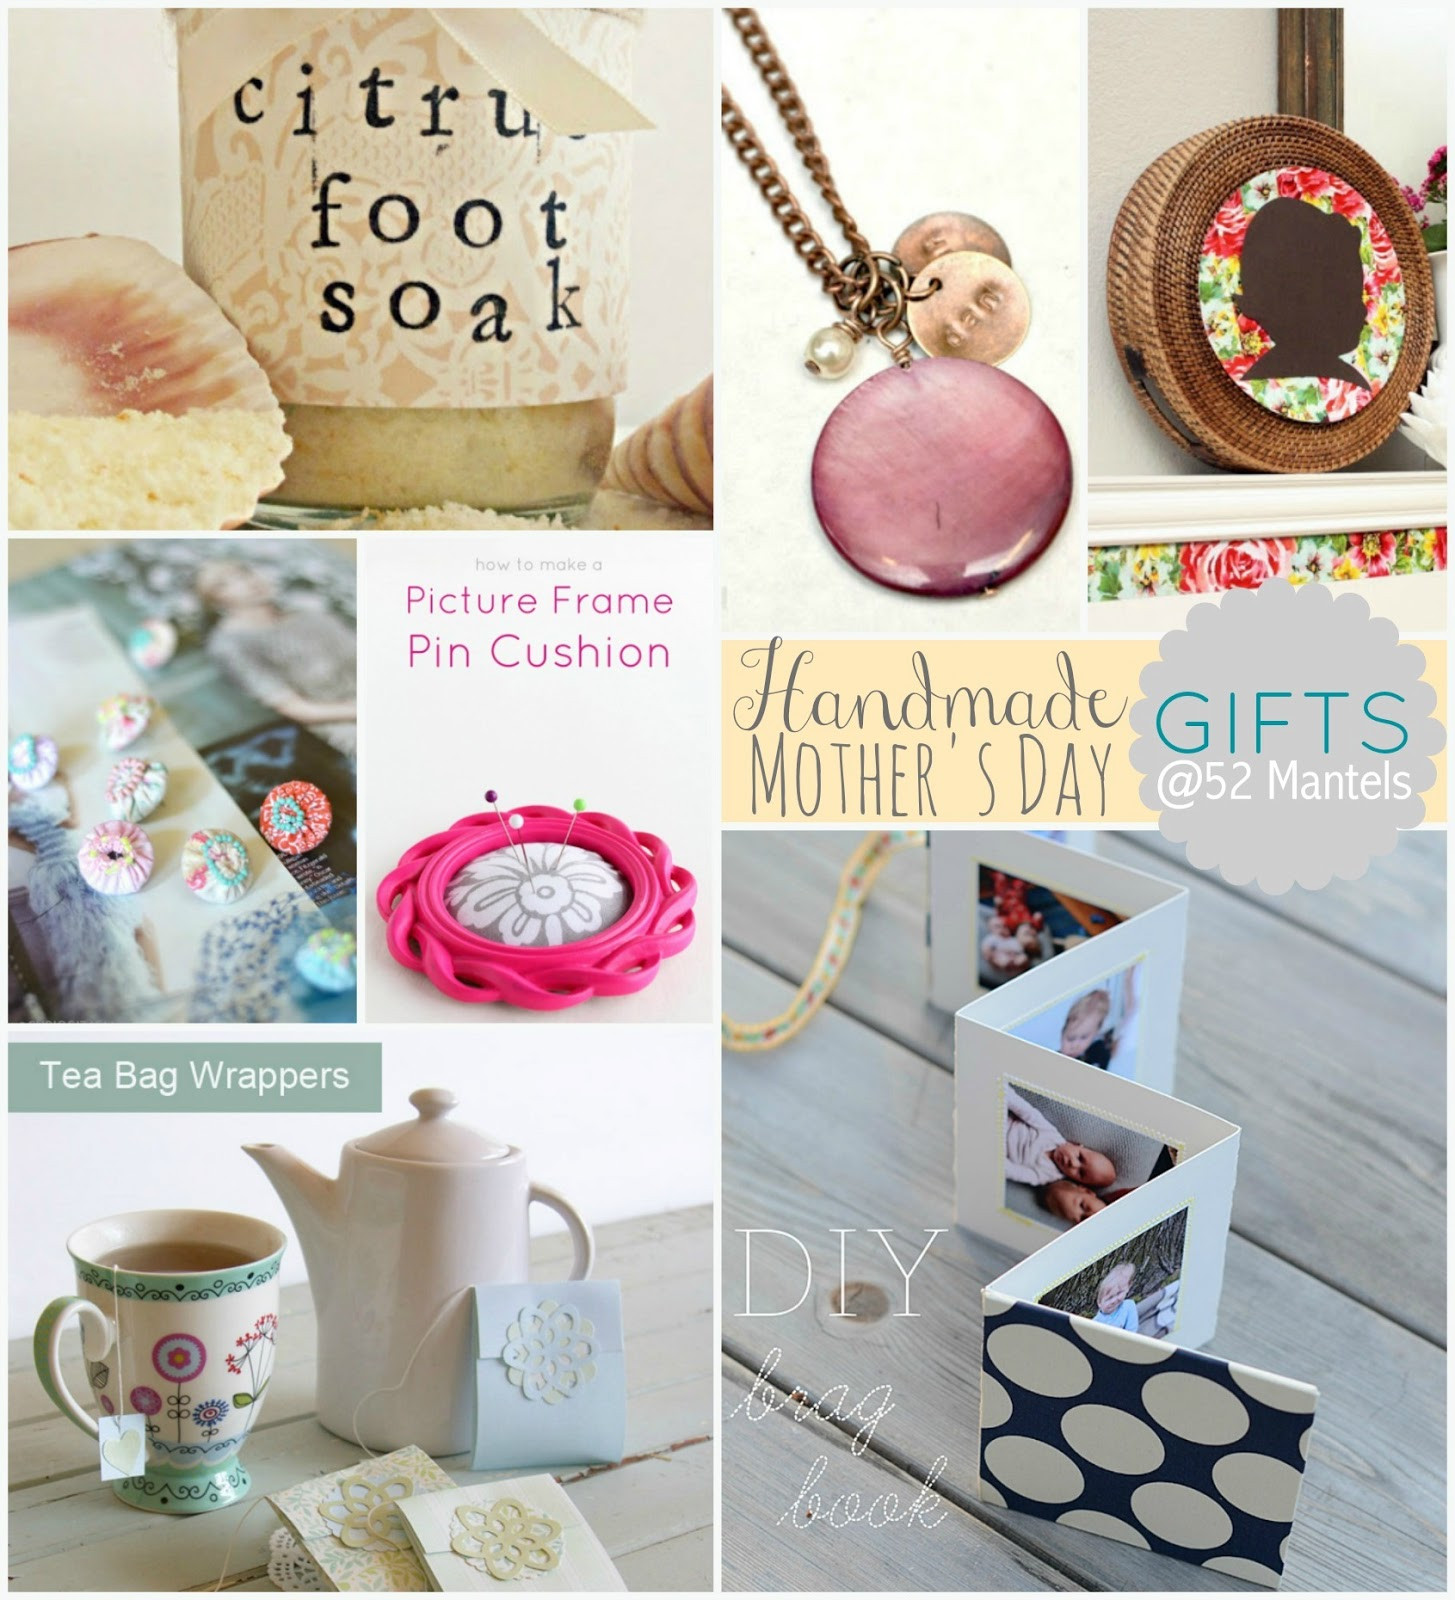 Best ideas about Mothers Day Handmade Gift Ideas
. Save or Pin 52 Mantels Handmade Mother s Day Gift Ideas Now.